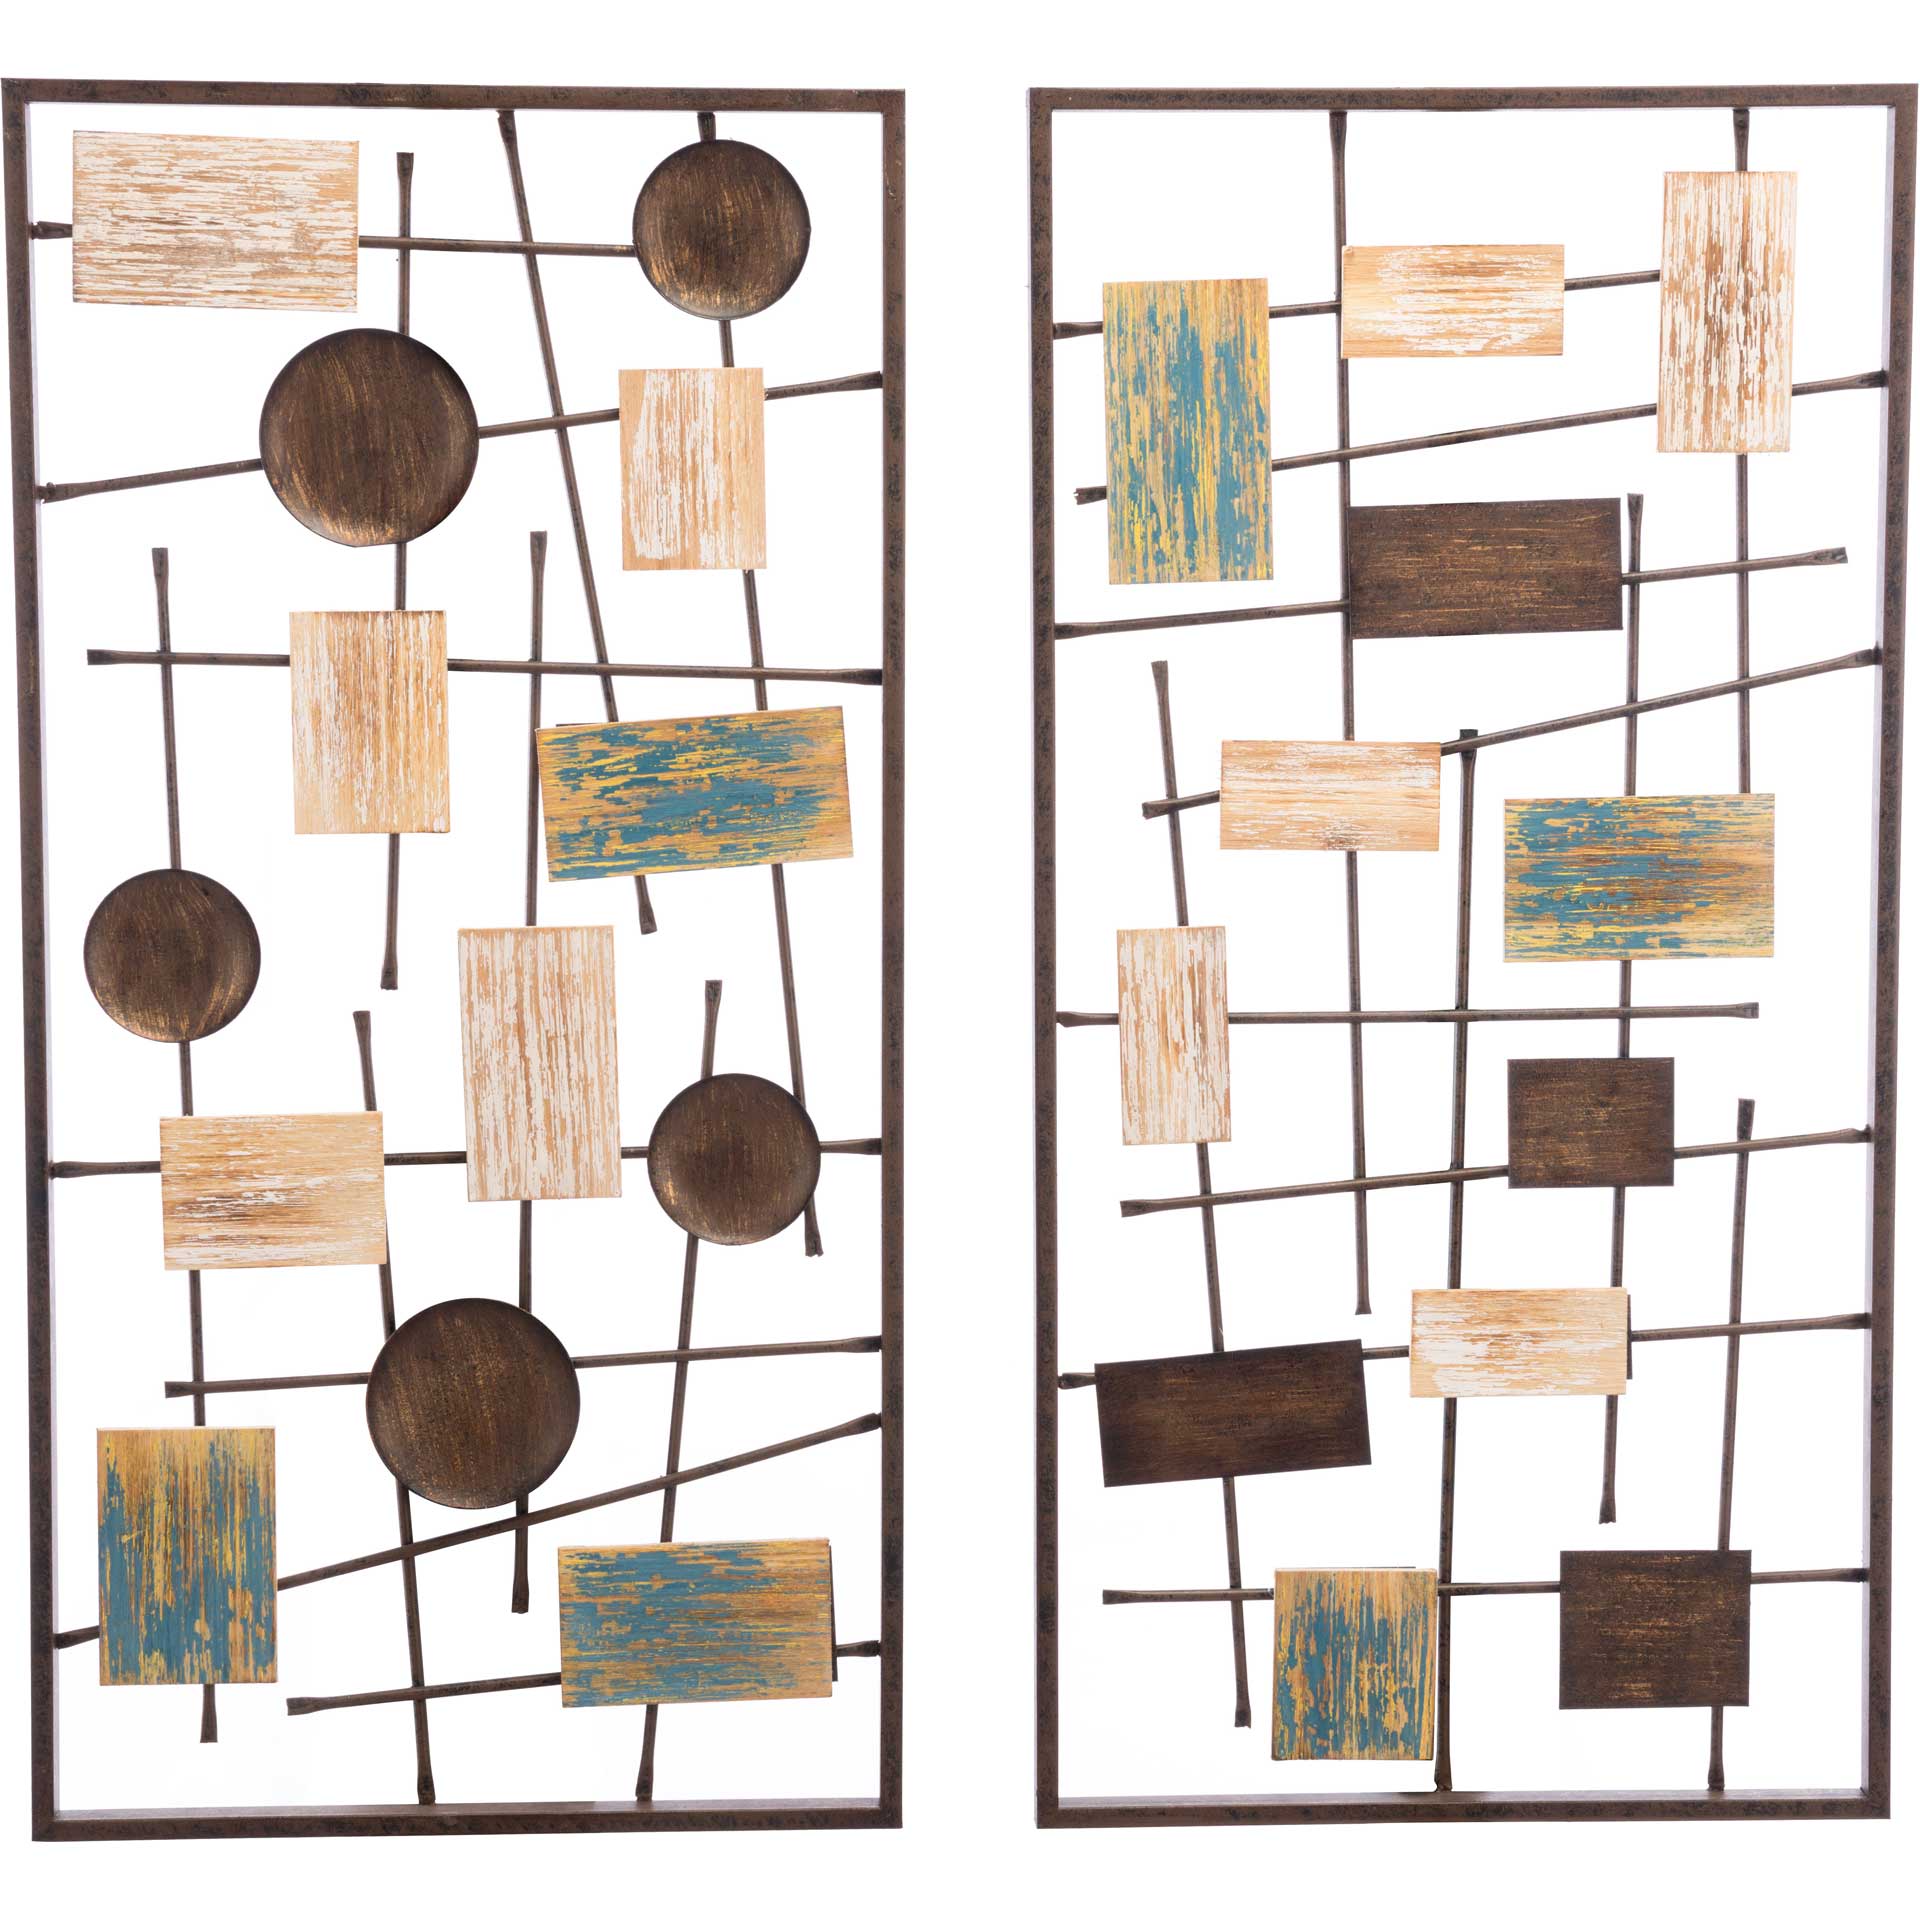 Abstract Wall Decor Antique (Set of 2)